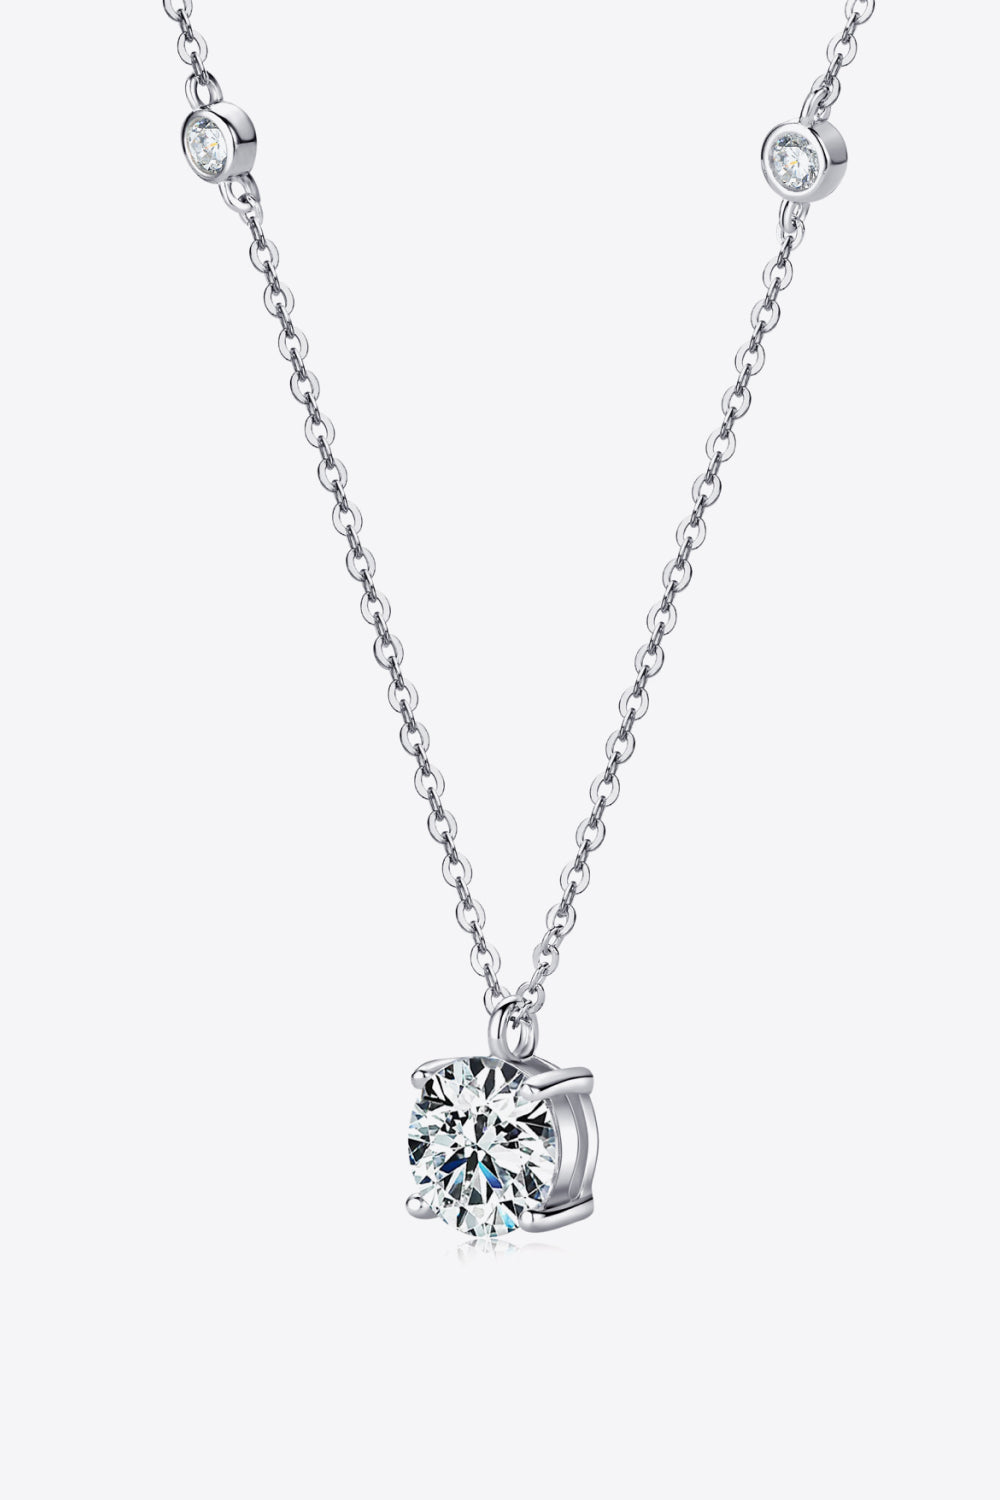 Moissanite 2 Carat 4-Prong 925 Sterling Silver Necklace